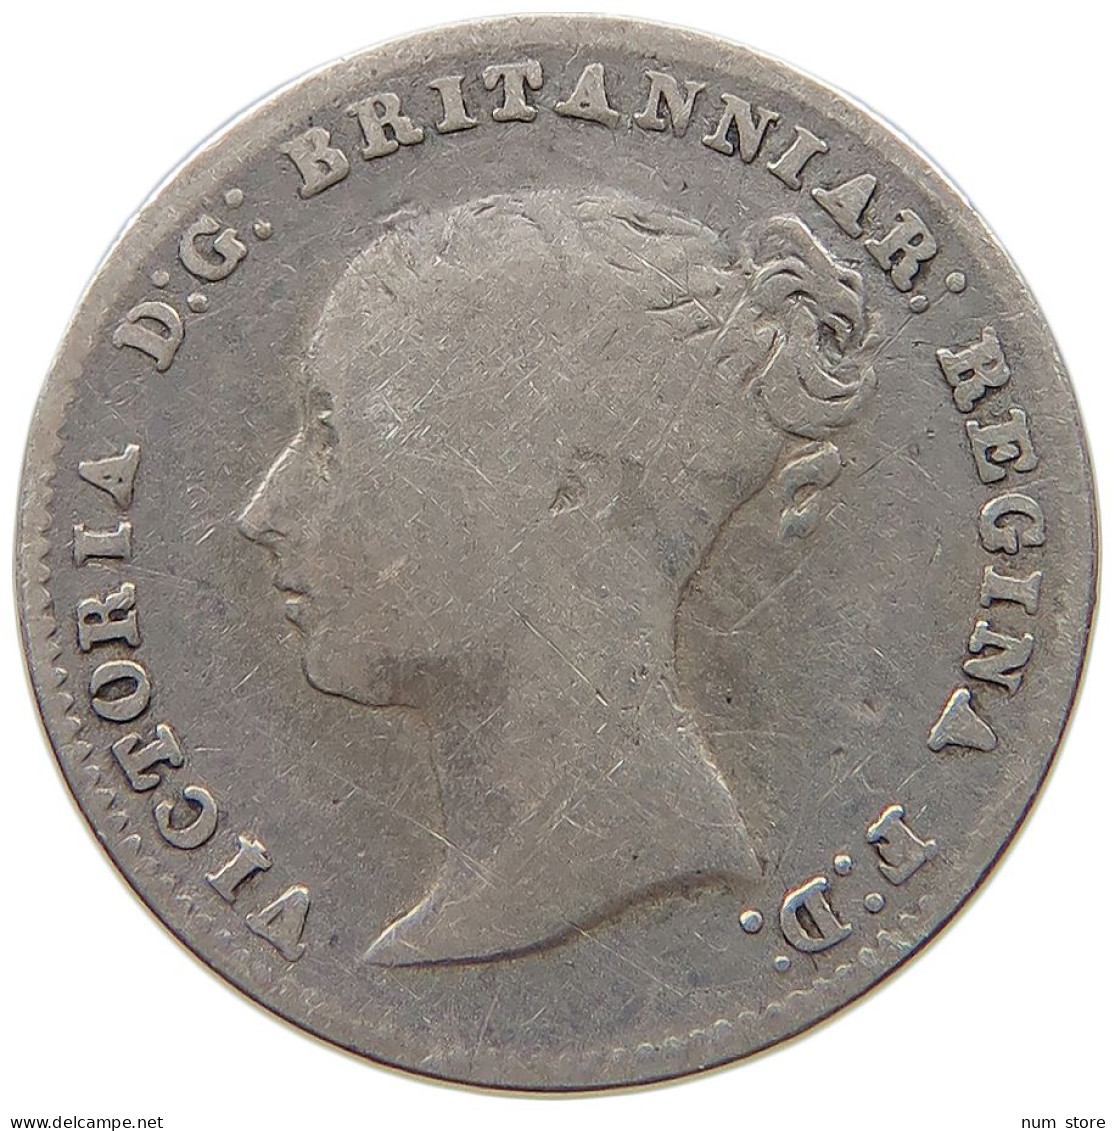 GREAT BRITAIN THREEPENCE 1859 Victoria 1837-1901 #a033 0181 - F. 3 Pence